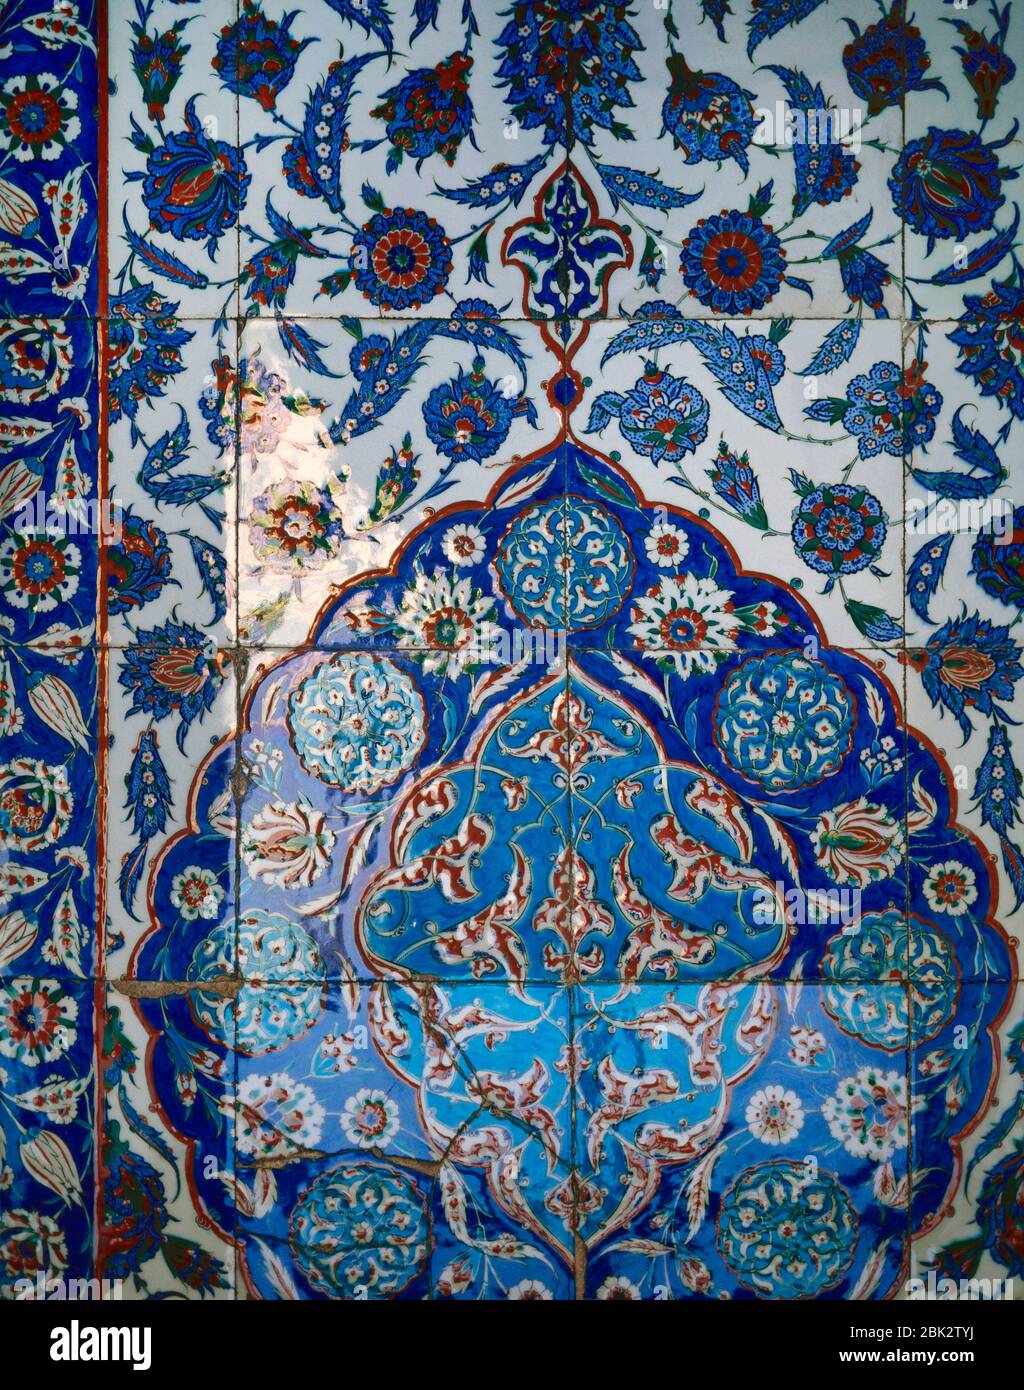 Turkey, Istanbul. Suleymaniye Mosque complex. Polychrome Iznik tiles. Inside of the Mausoleum of Suleiman the Magnificent, 1558. It was built by the architect Mimar Sinan (1480-1588). Stock Photo